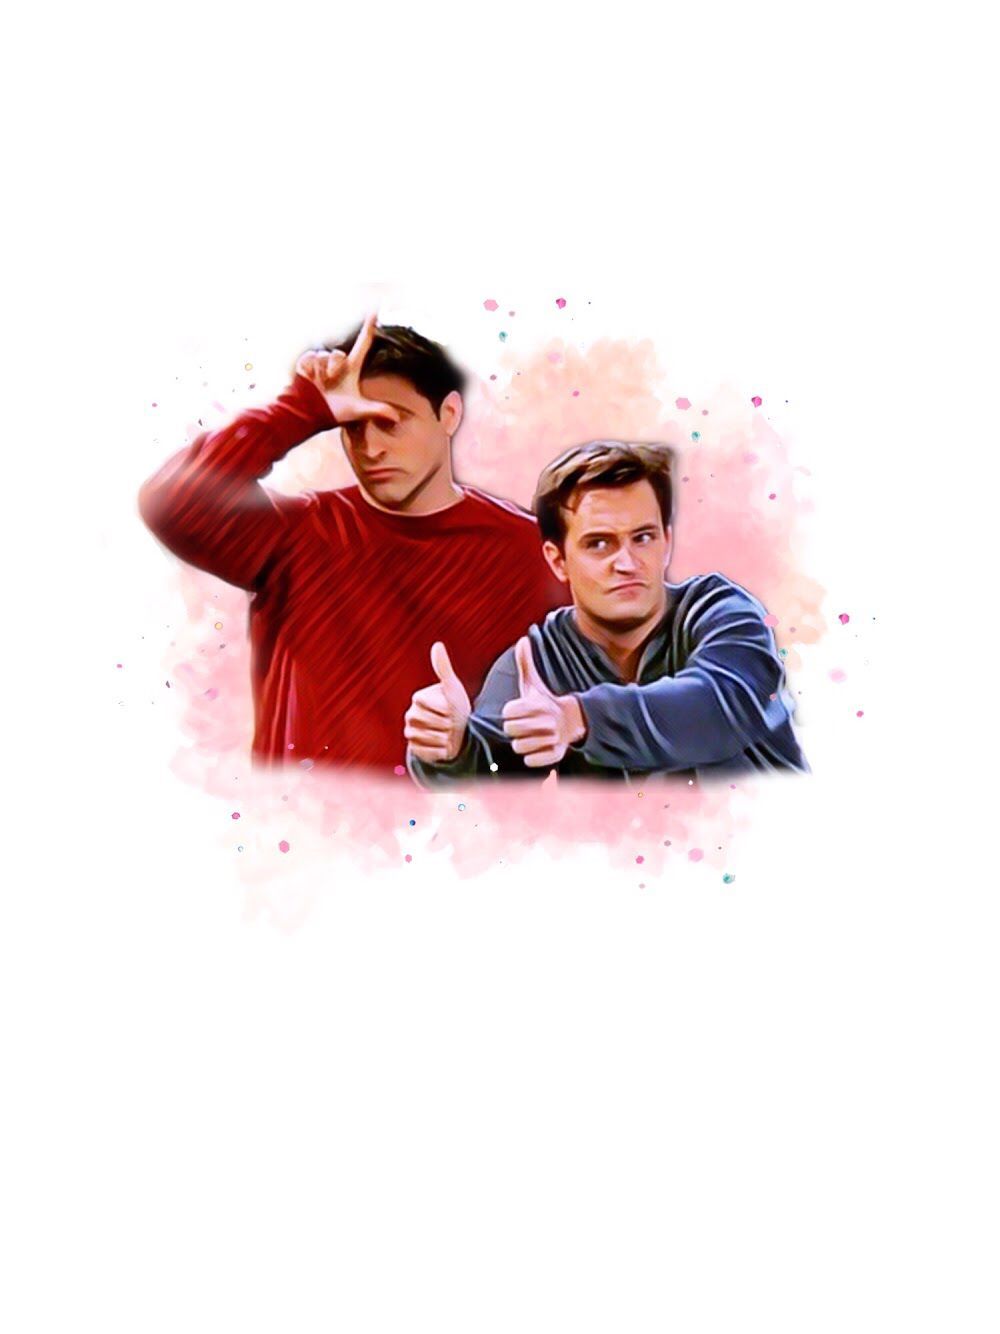 Chandler and Joey. Friends tv quotes, Joey friends, Friends tv